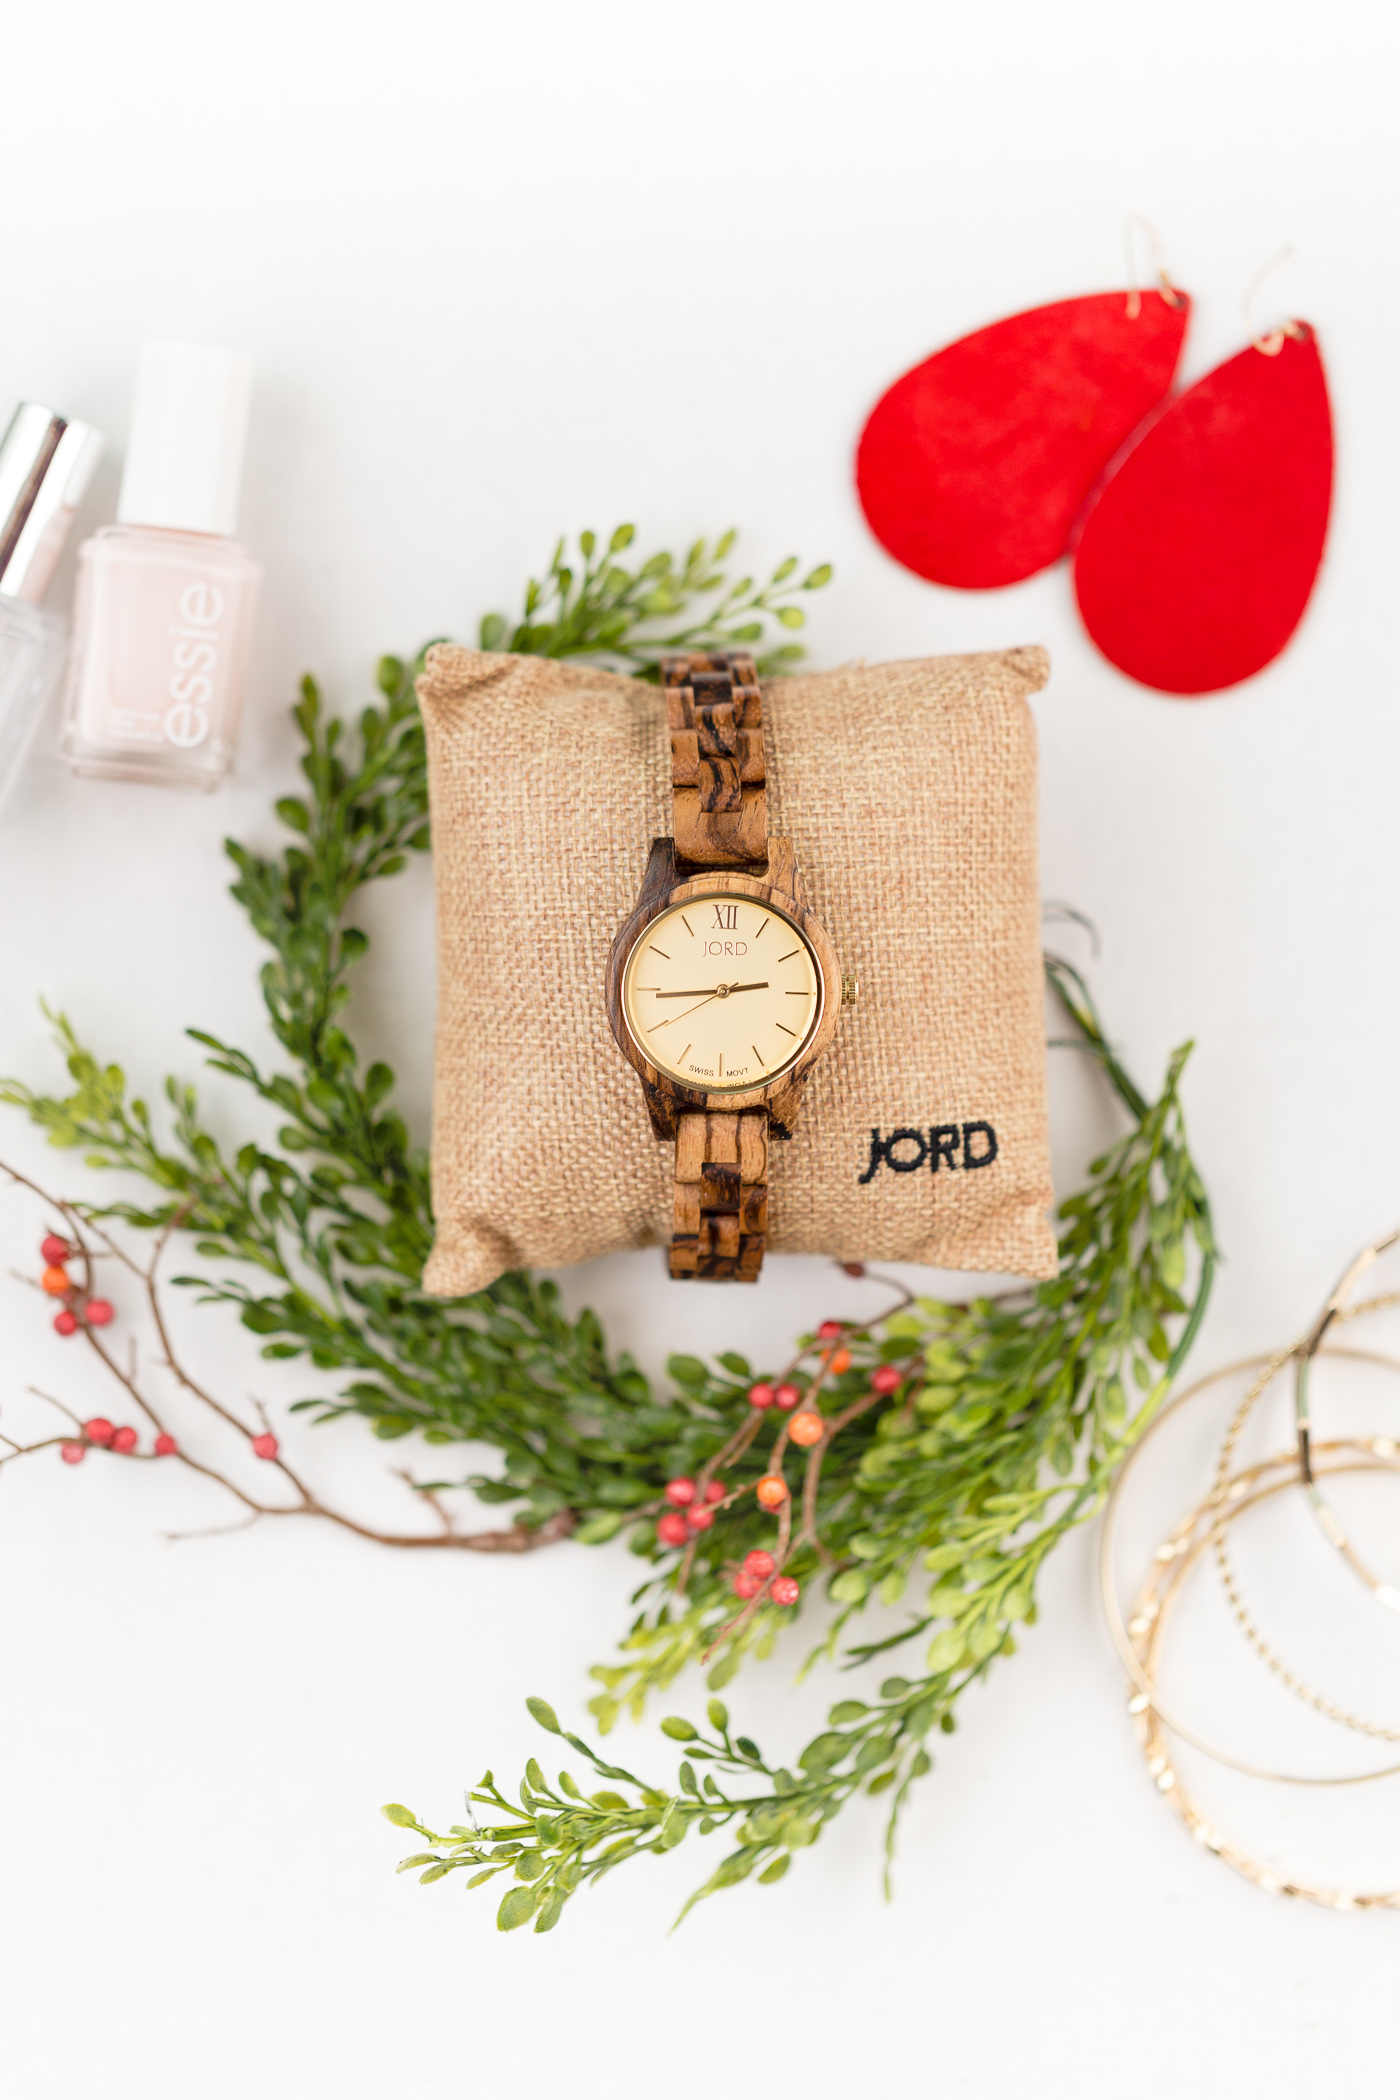 Holiday Gift Guide-Pretty Accessories: earrings, women's watch and nail polish are just a few of my favorite accessories that the ladies in your life are bound to en